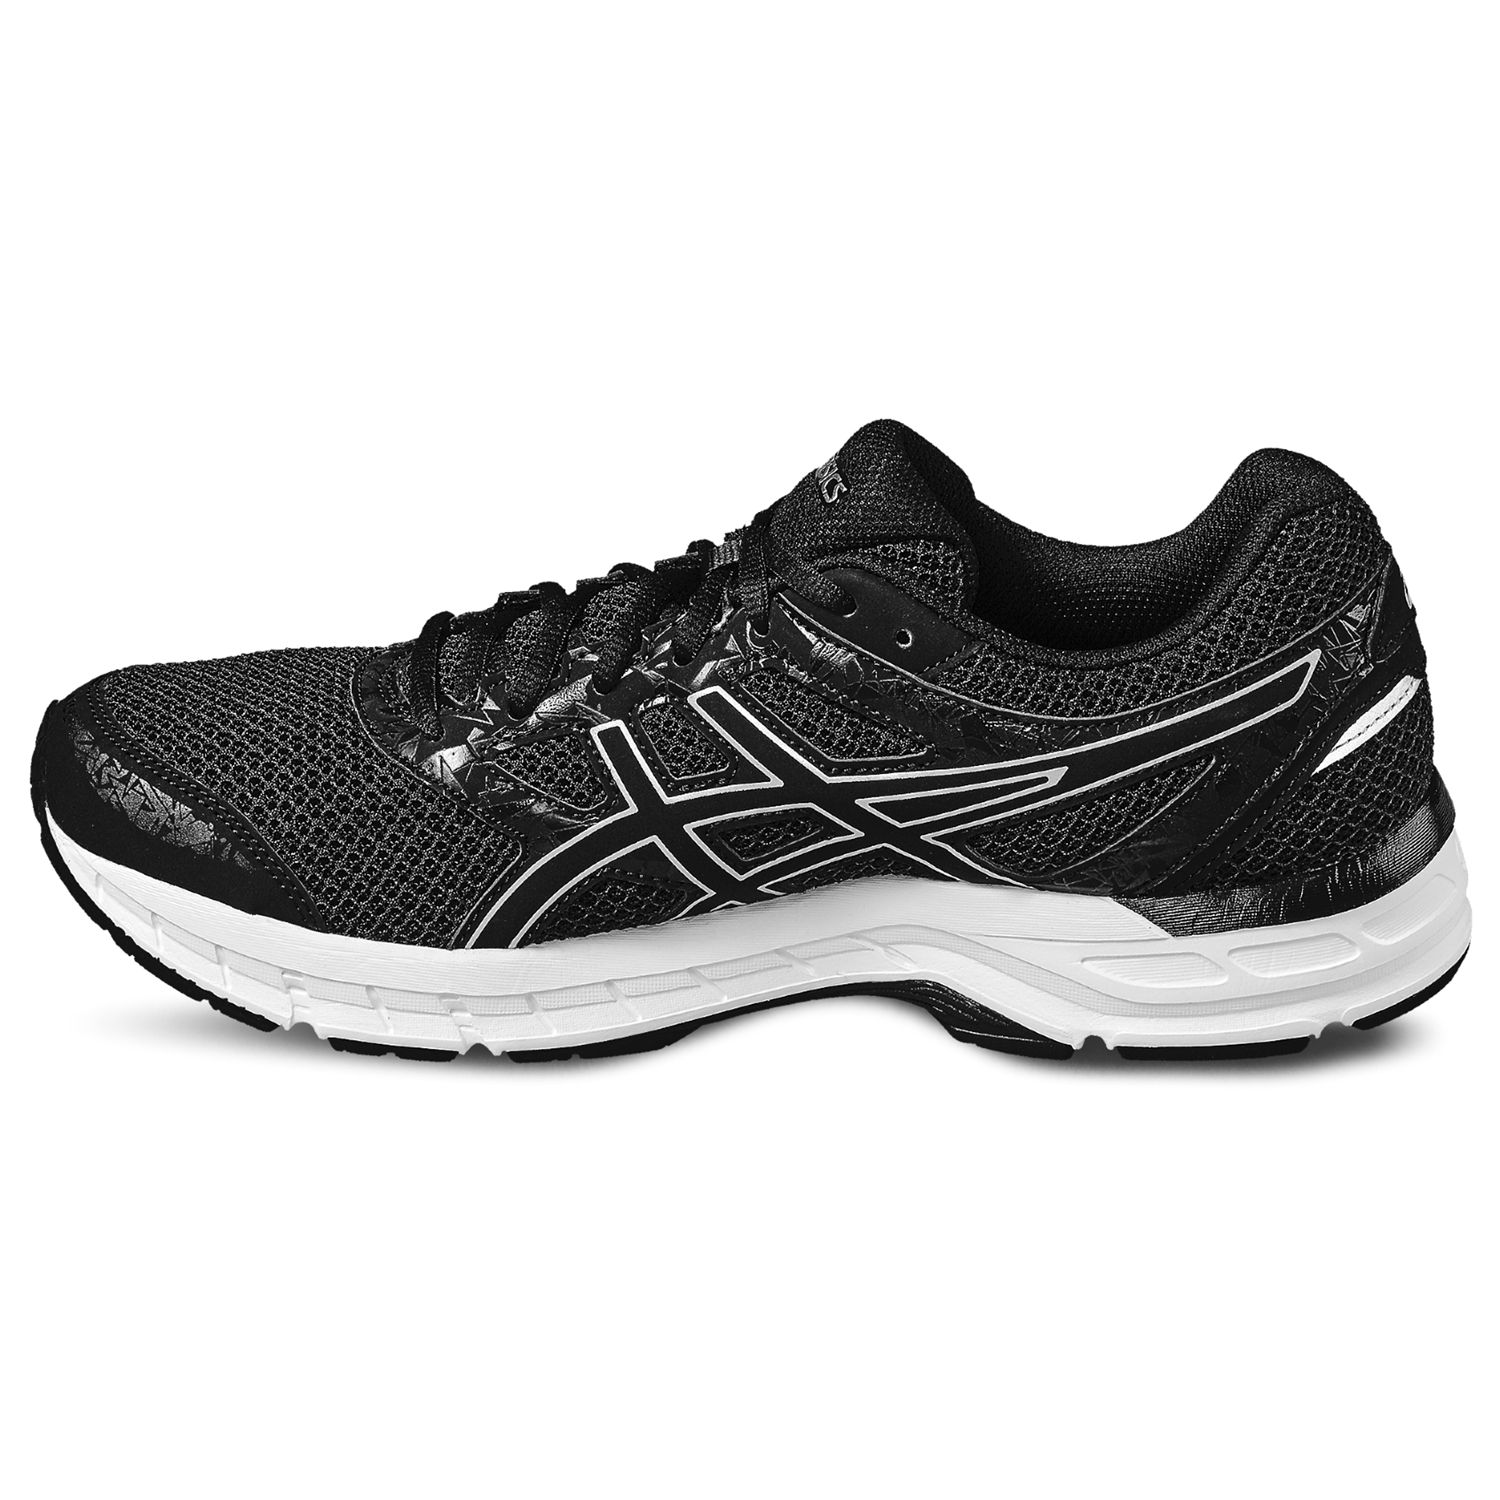 gel excite 4 asics review